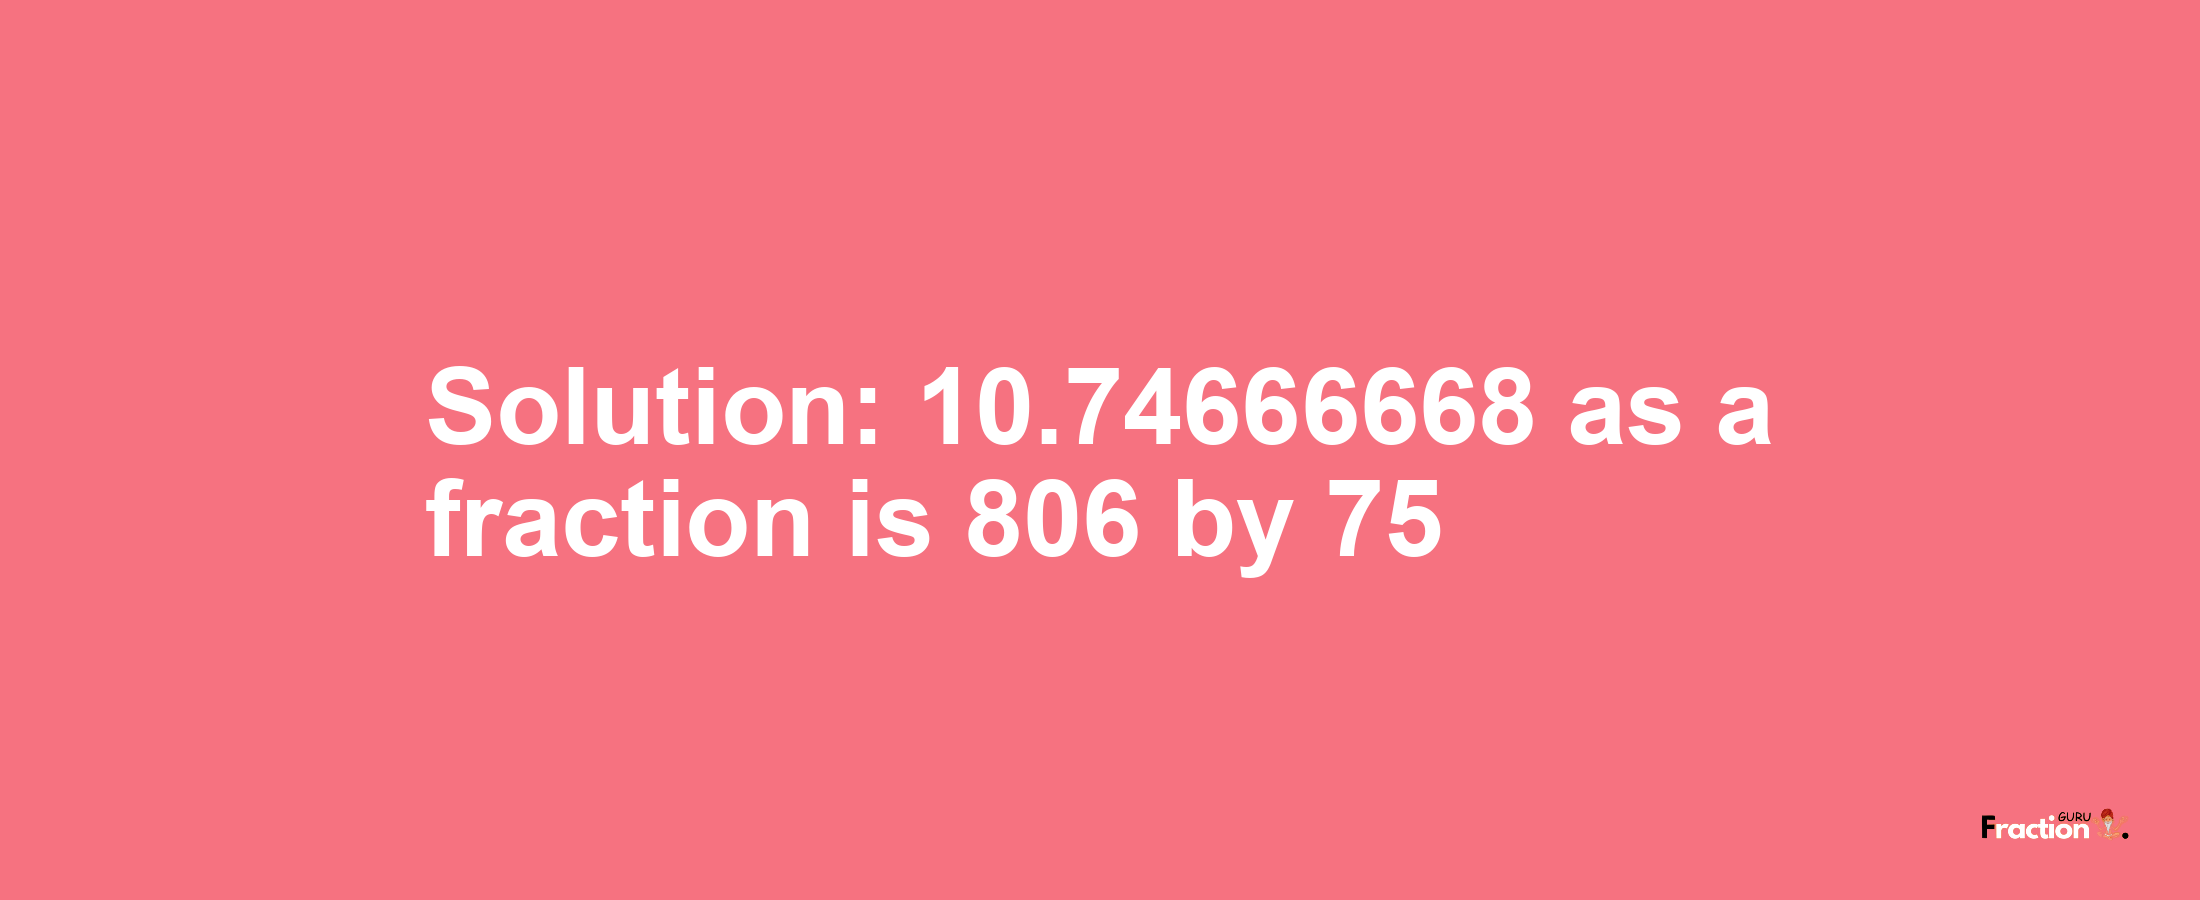 Solution:10.74666668 as a fraction is 806/75